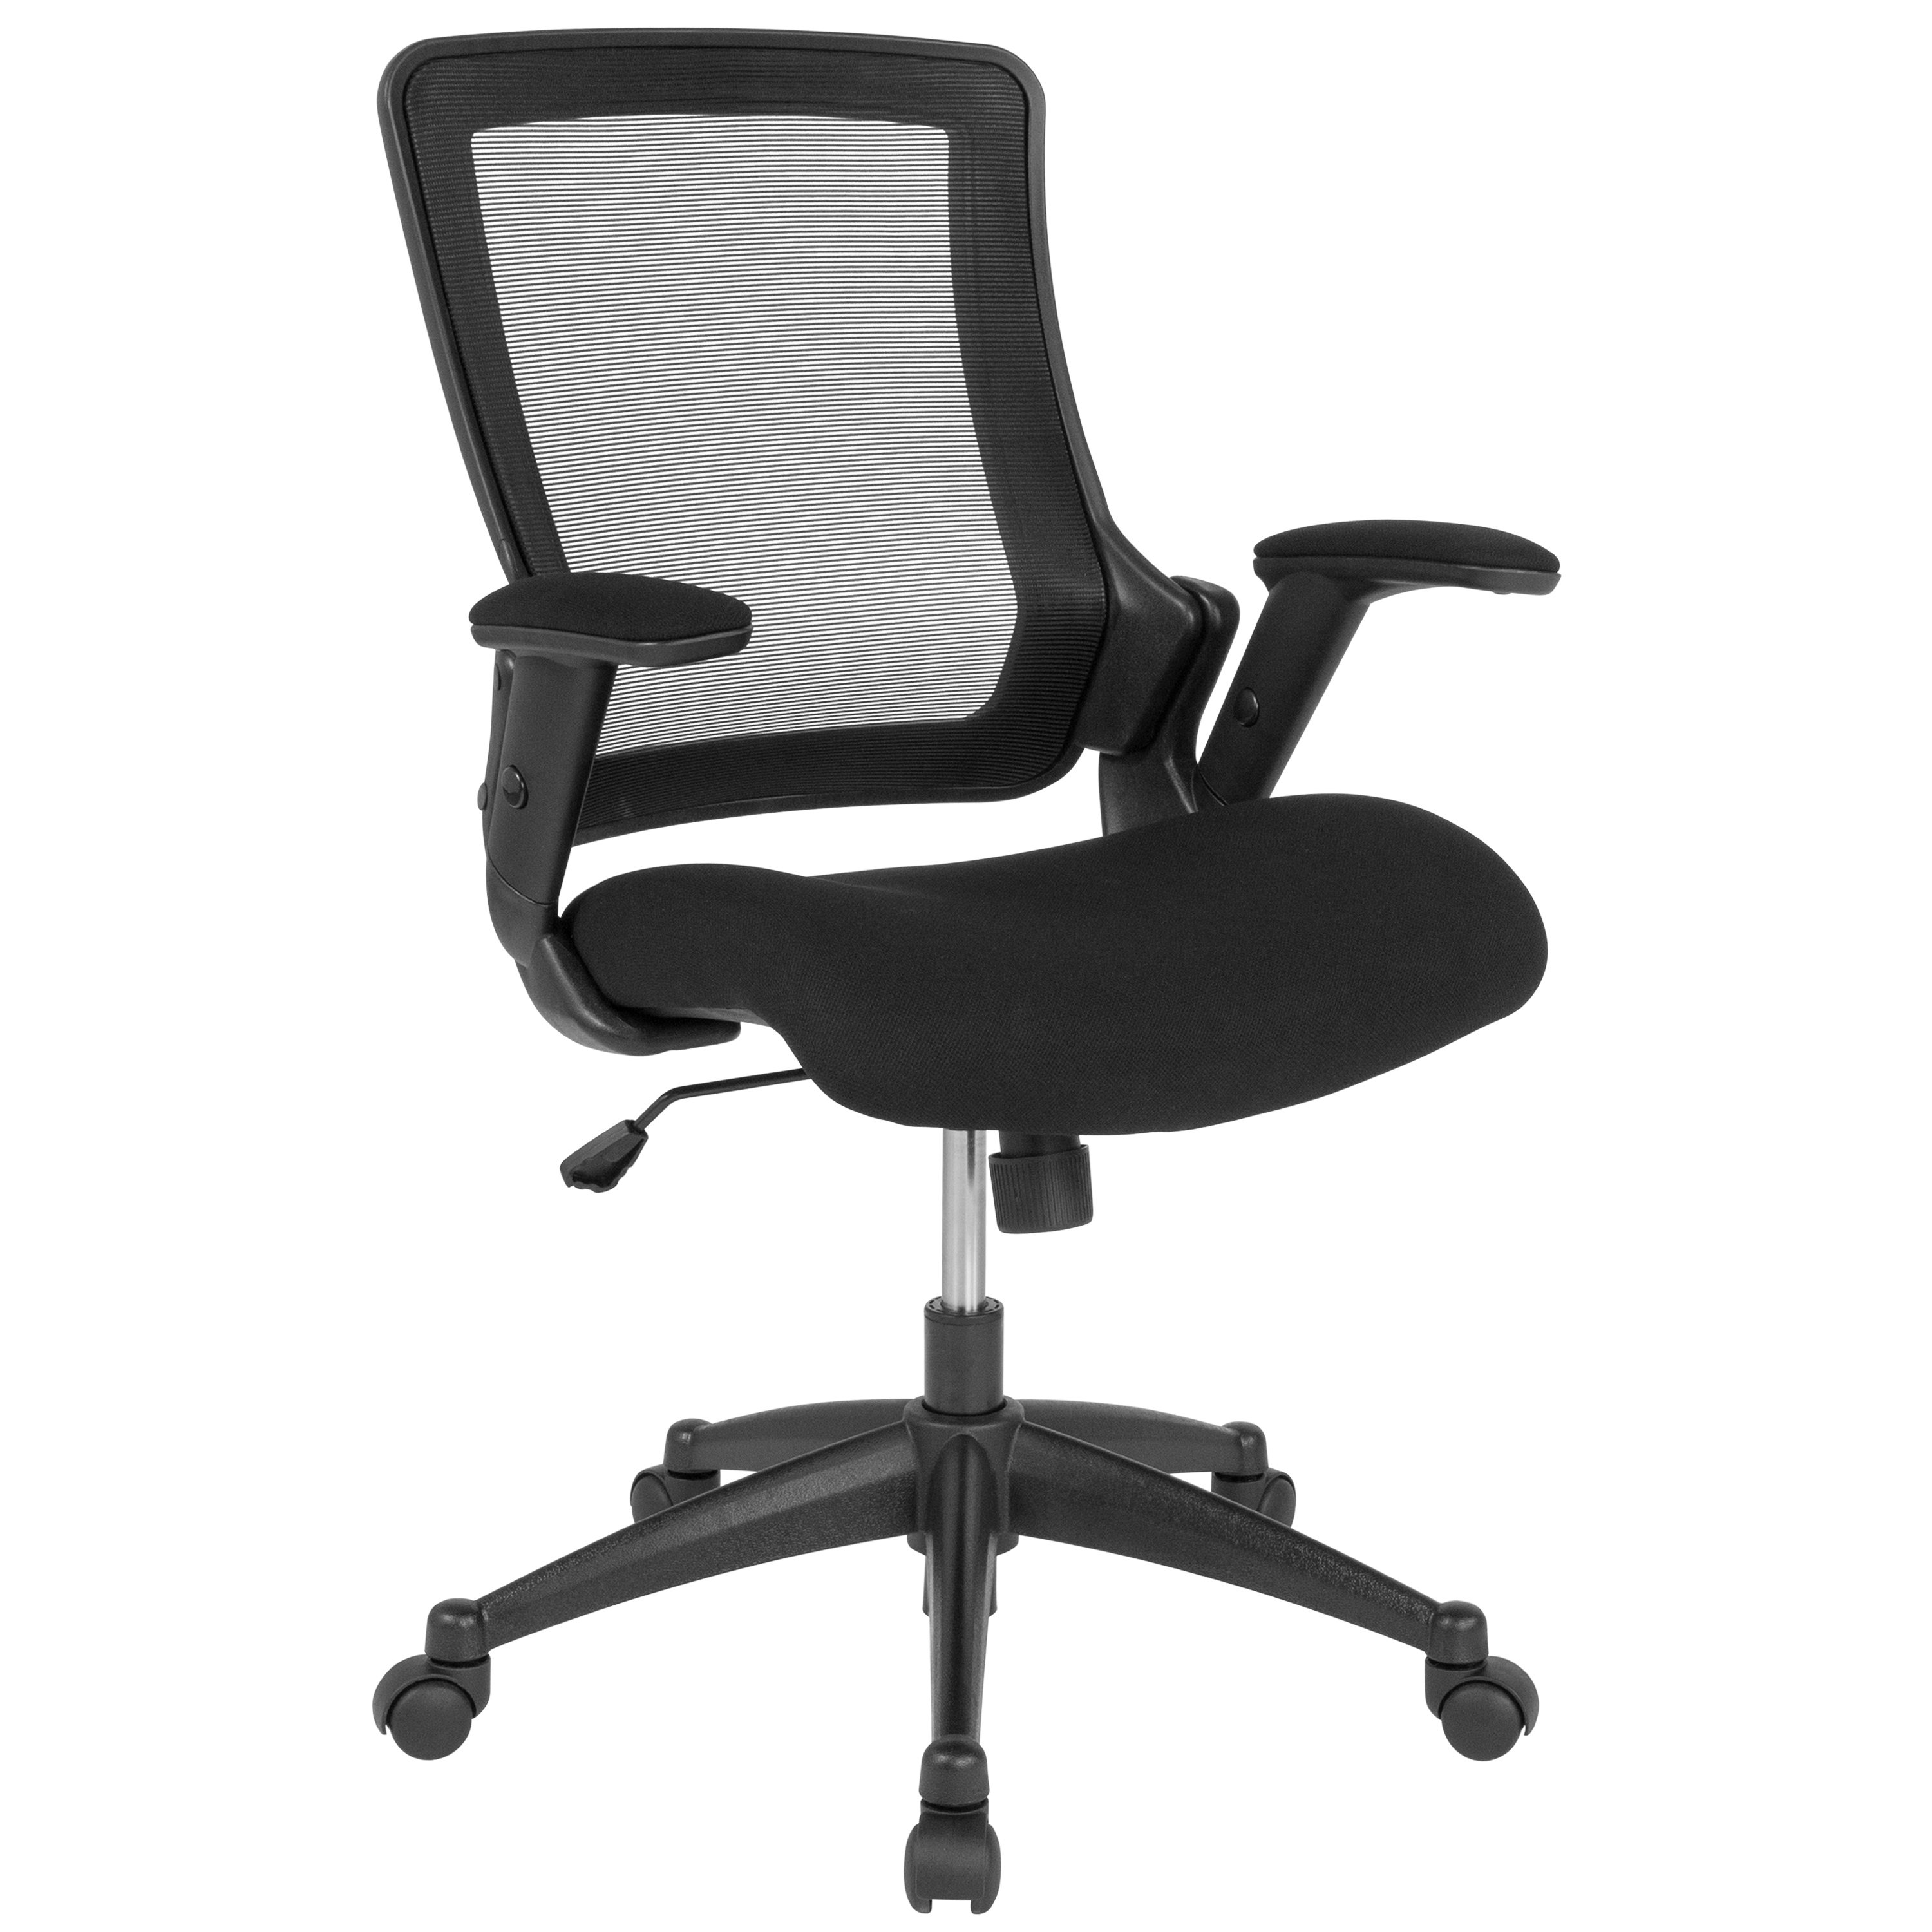 Flash Furniture Hamilton Mid-Back Black Mesh Executive Swivel Office Chair with Molded Foam Seat and Adjustable Arms - image 1 of 13